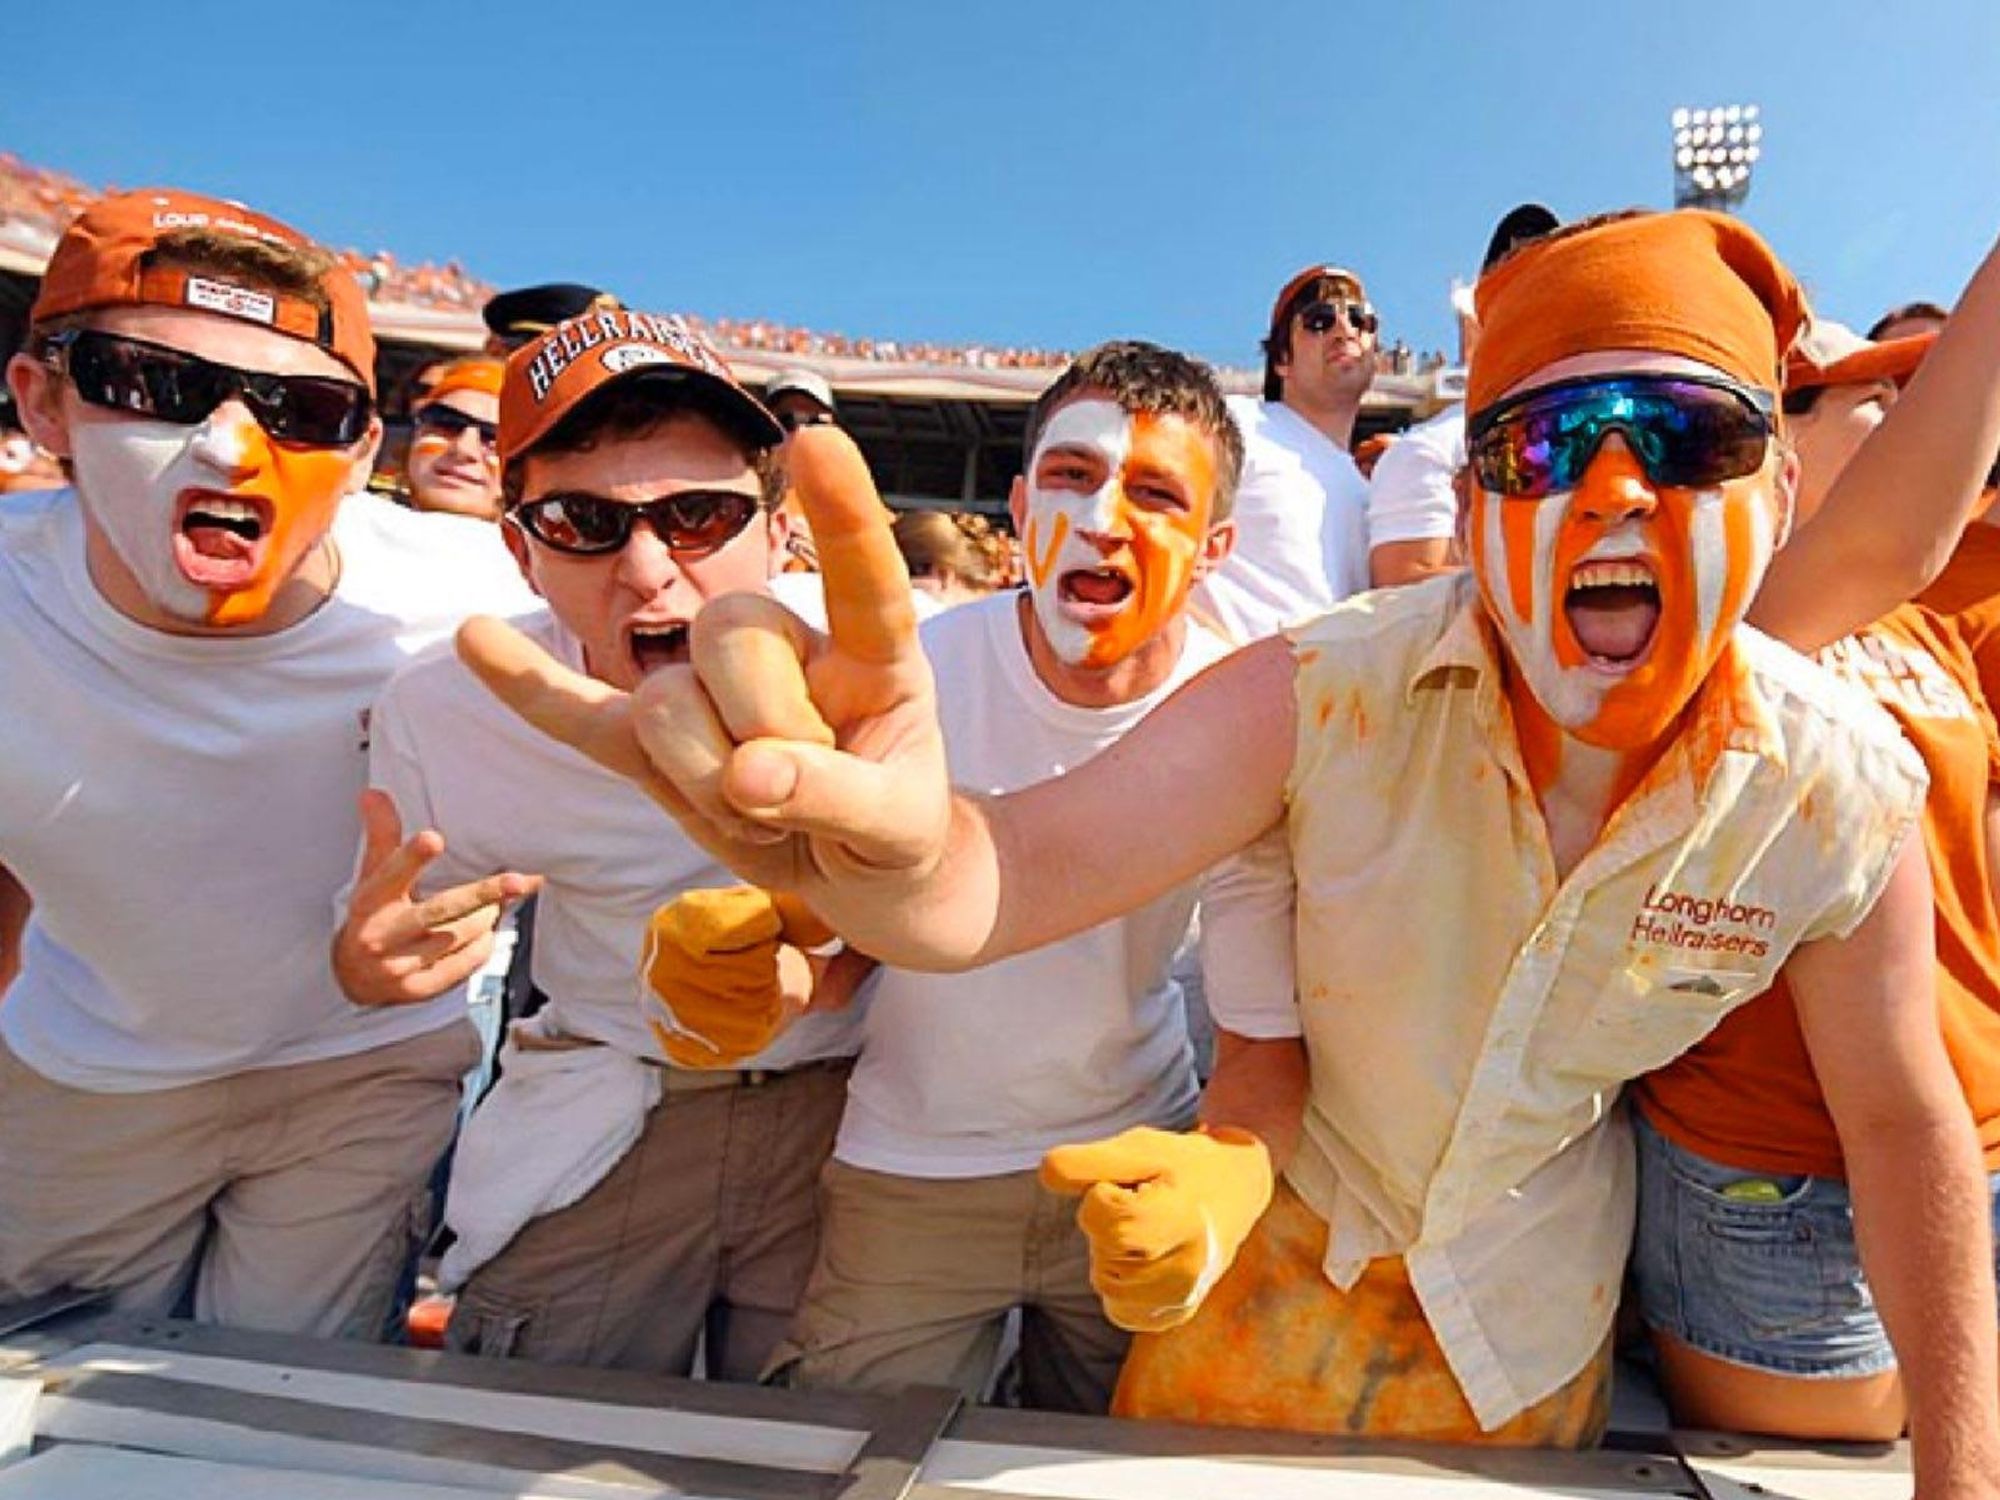 University of Texas at Austin hellraisers guys with painted faces at football game partying